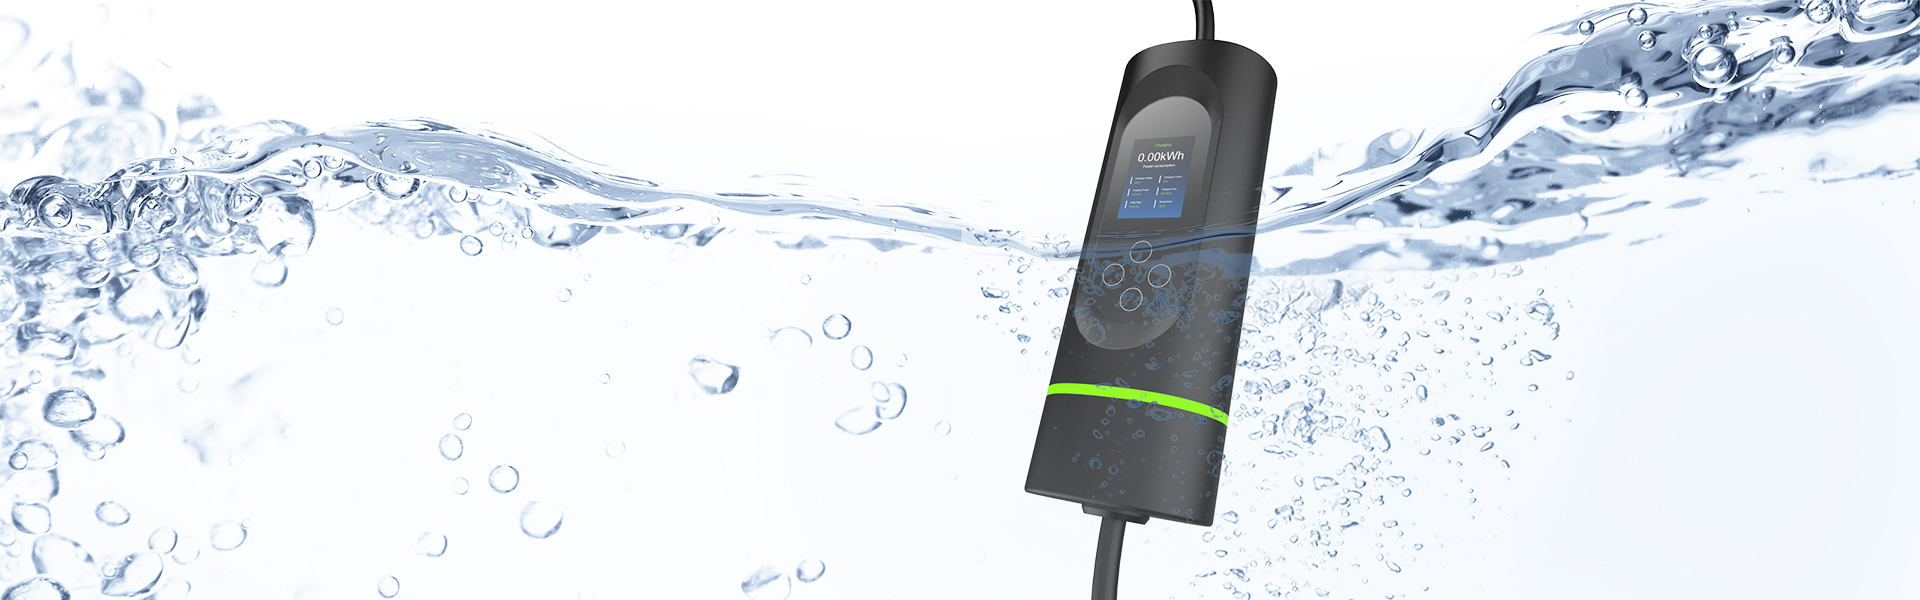 Creaxio-EV charger-electric car charger